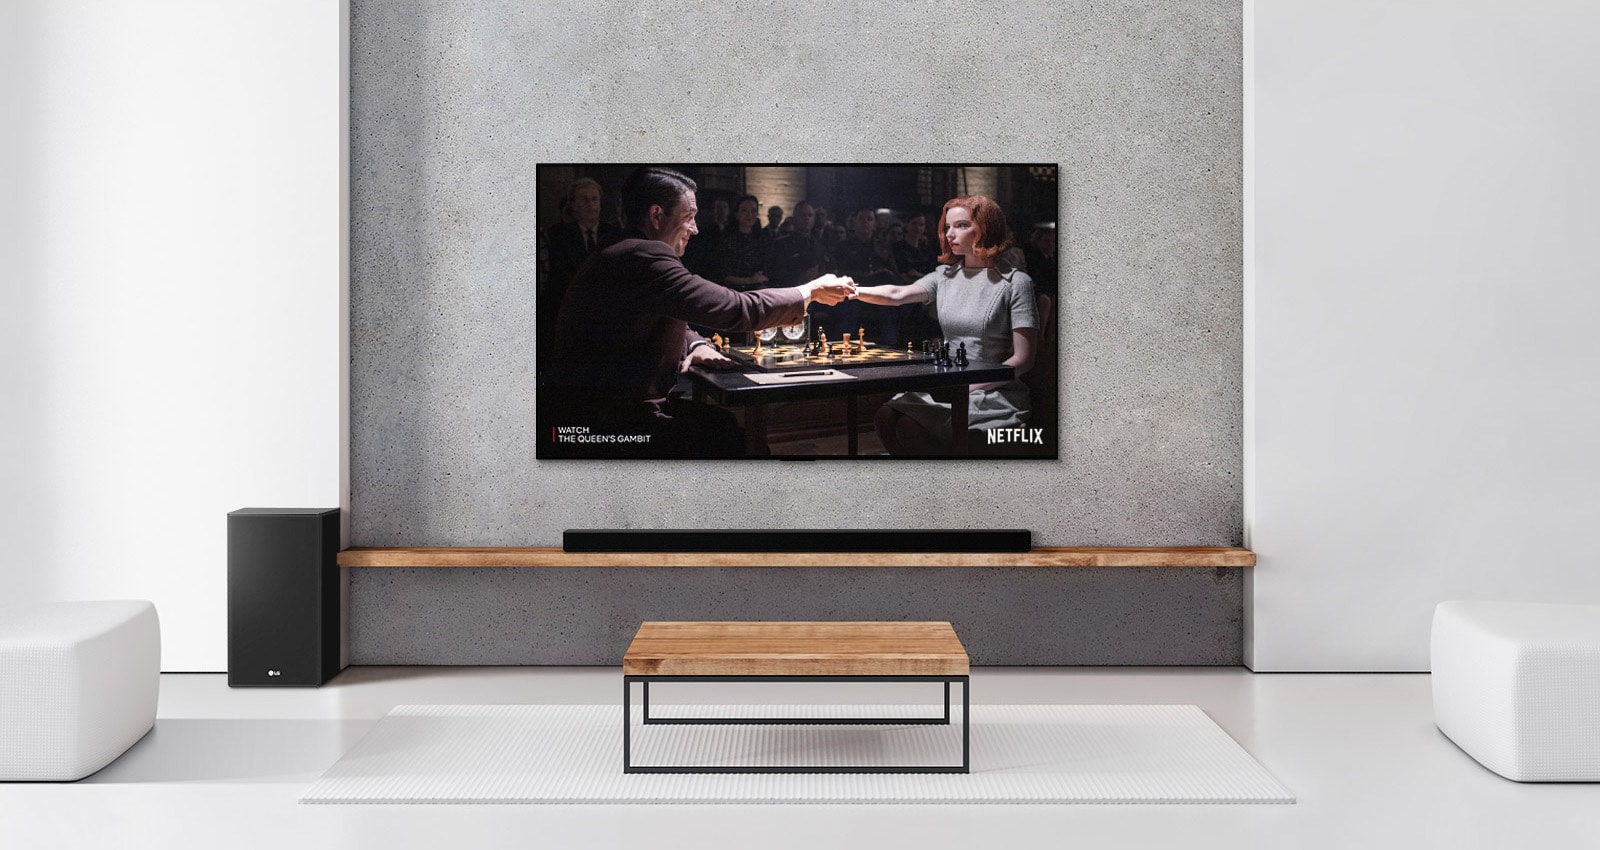 A subwoofer, and a soundbar, and TV are in a white living room. A woman and a man are playing chess on TV screen.